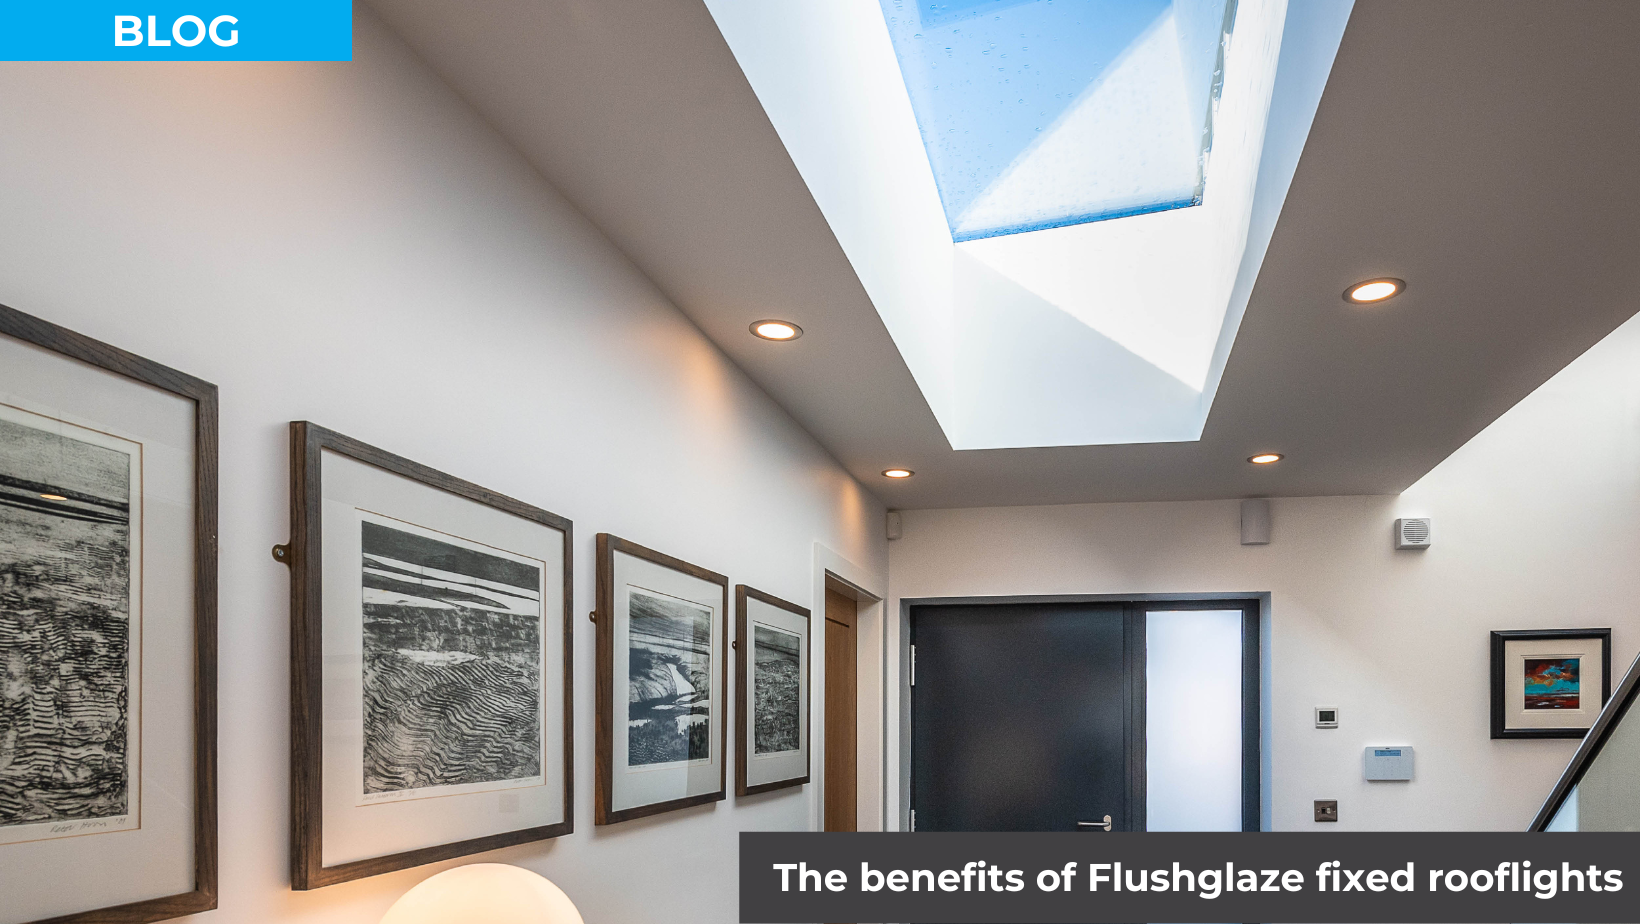 What are the benefits of Flushglaze fixed rooflights?